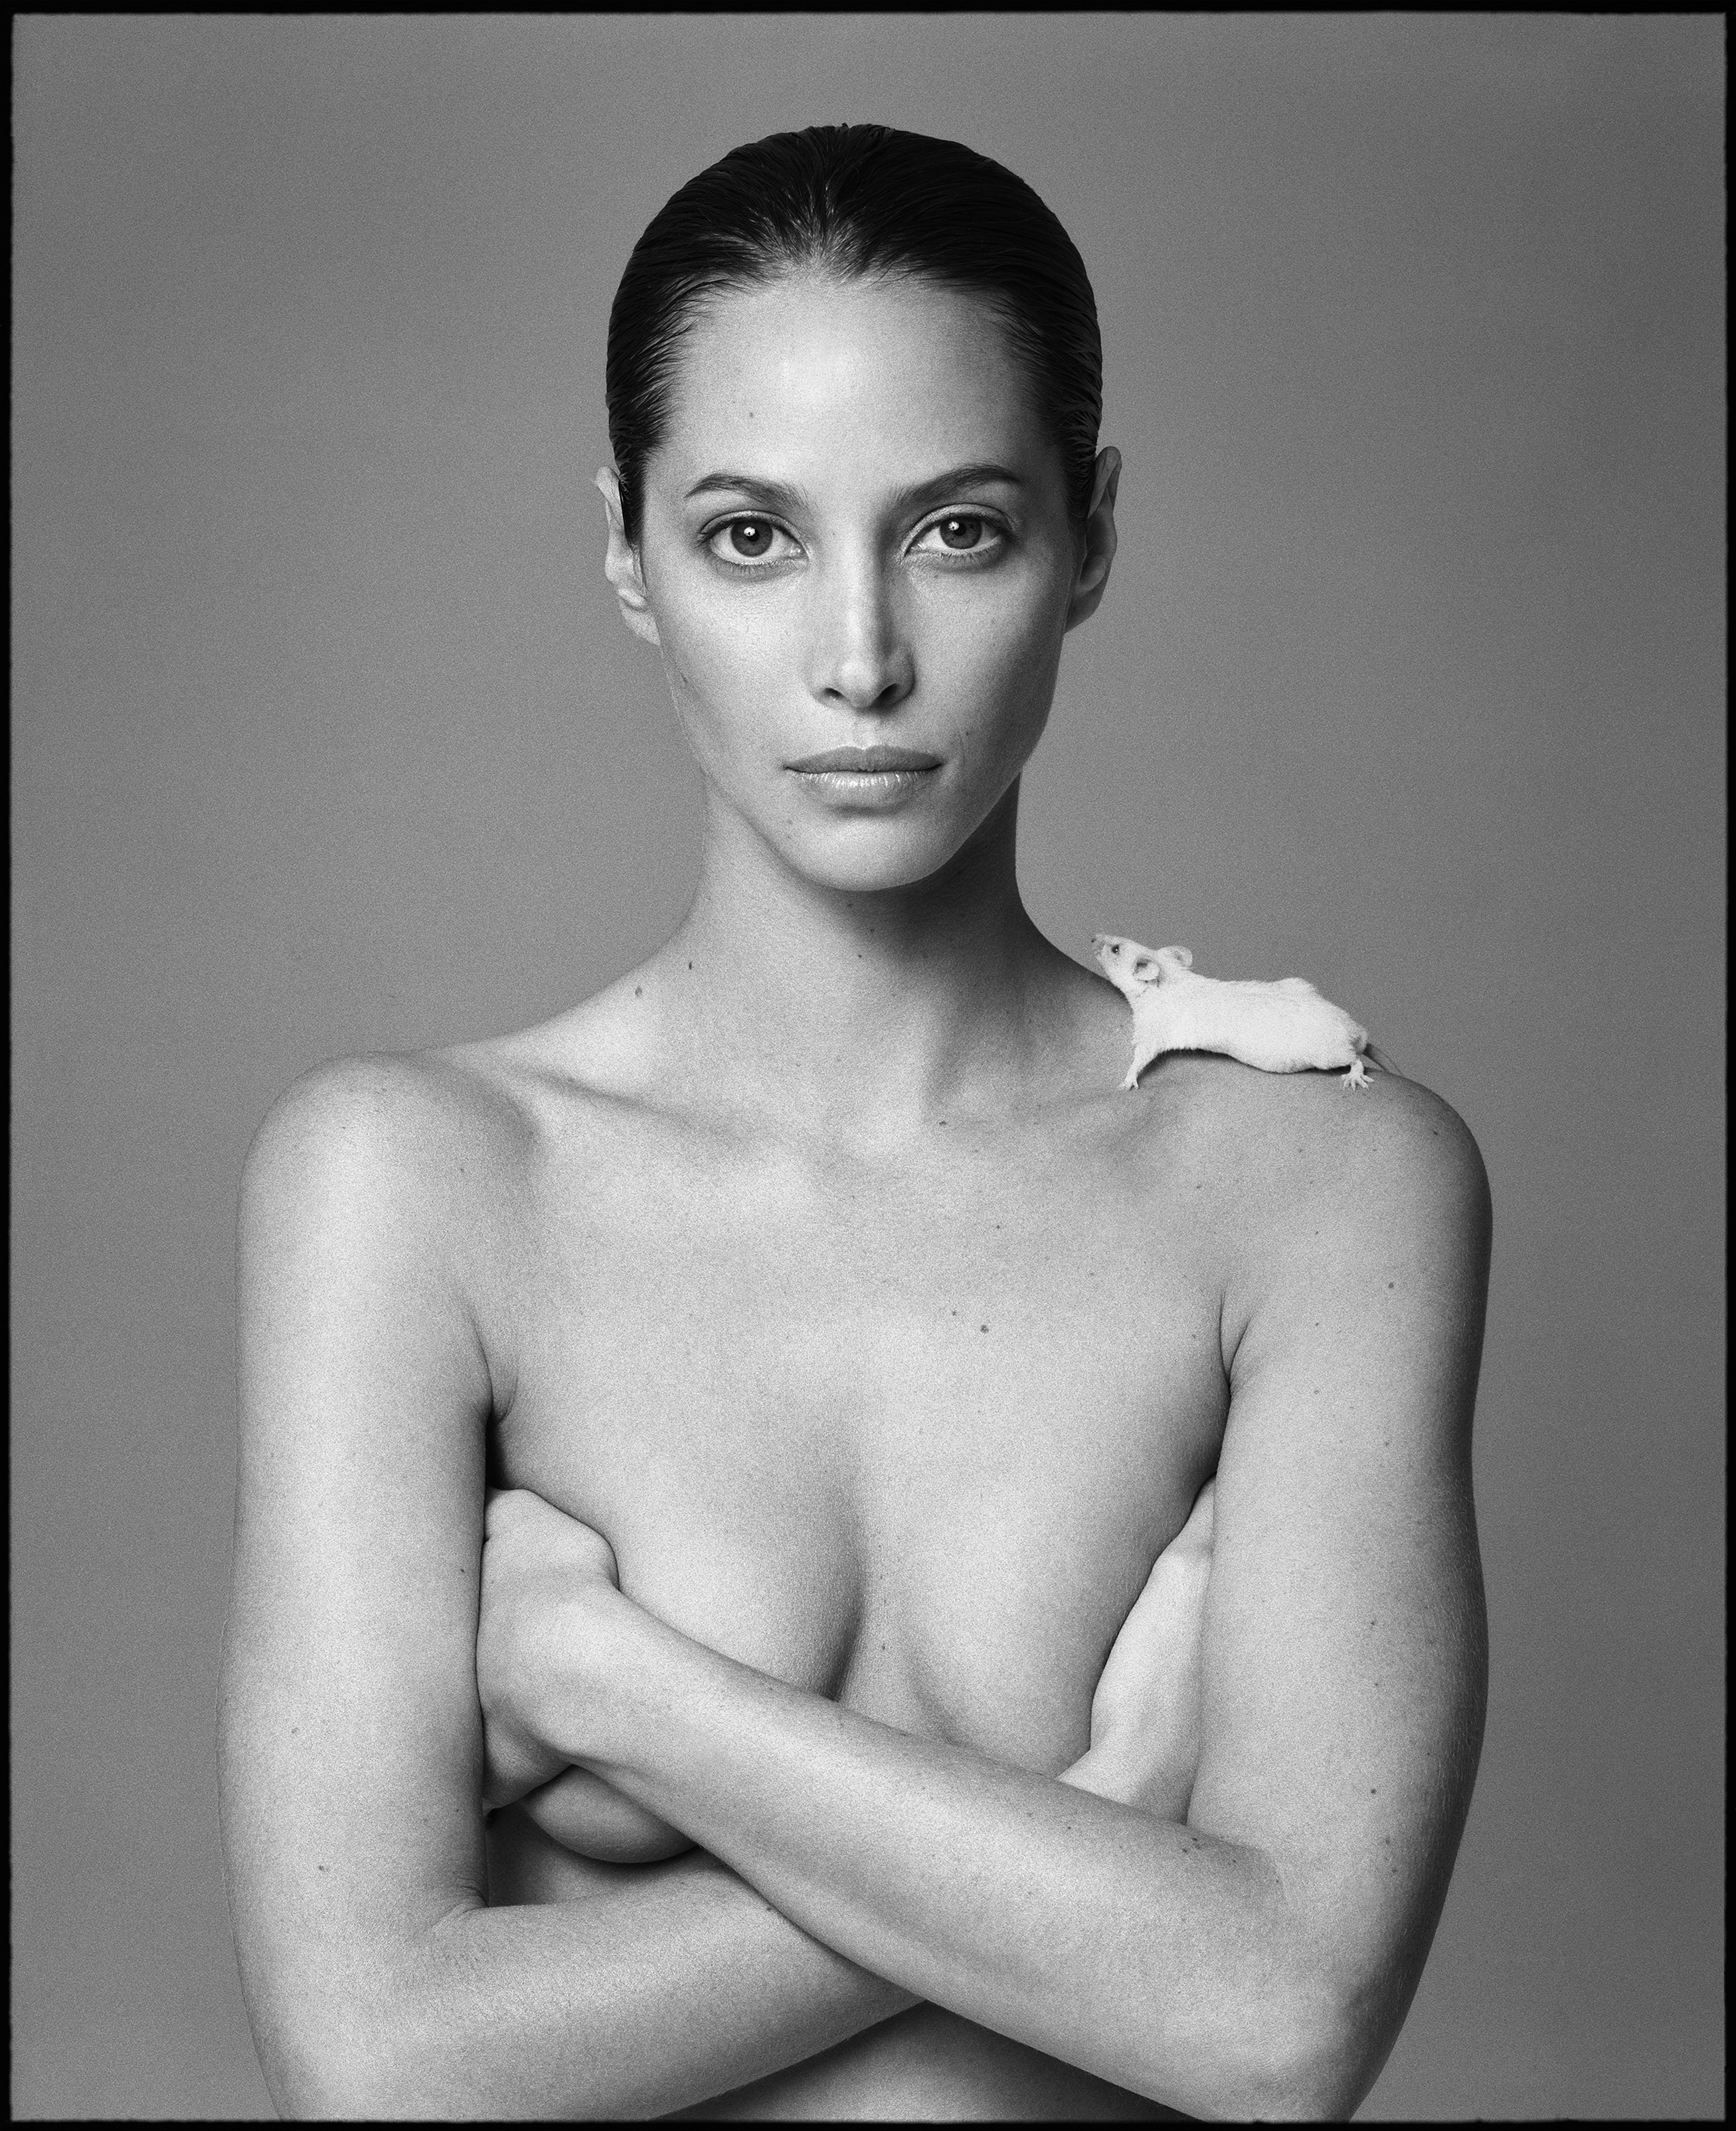 a portrait of christy turlington nude with her arms crossed by patrick demarchelier 1999